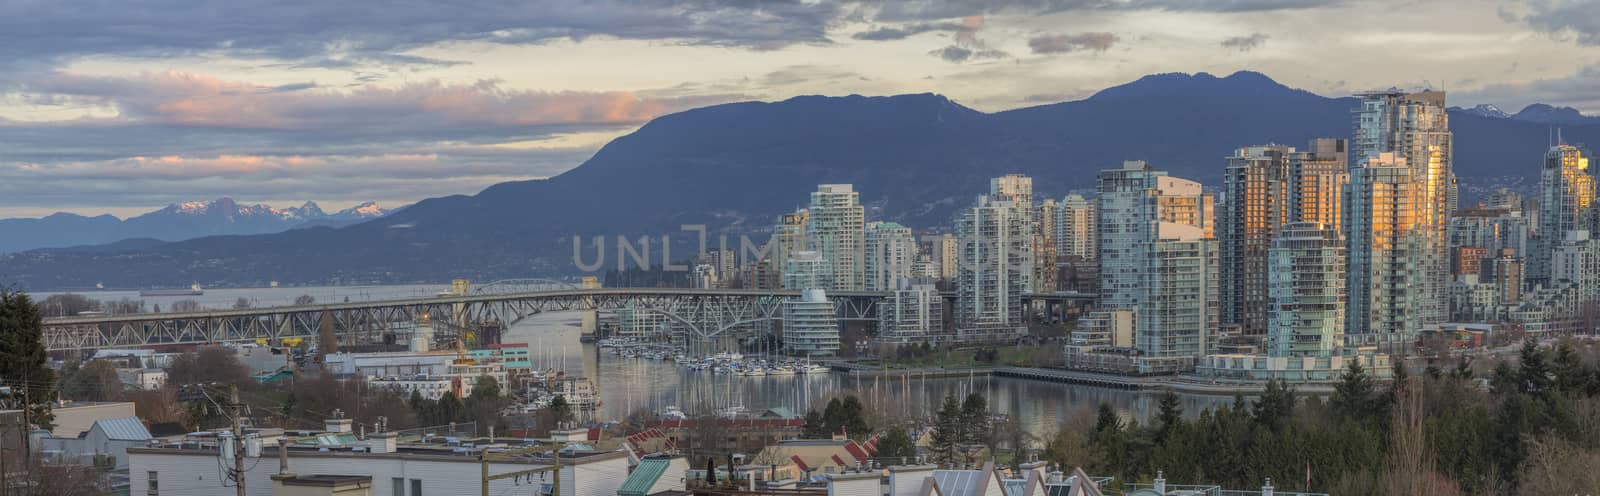 Vancouver BC Skyline with Granville Island Bridge by jpldesigns